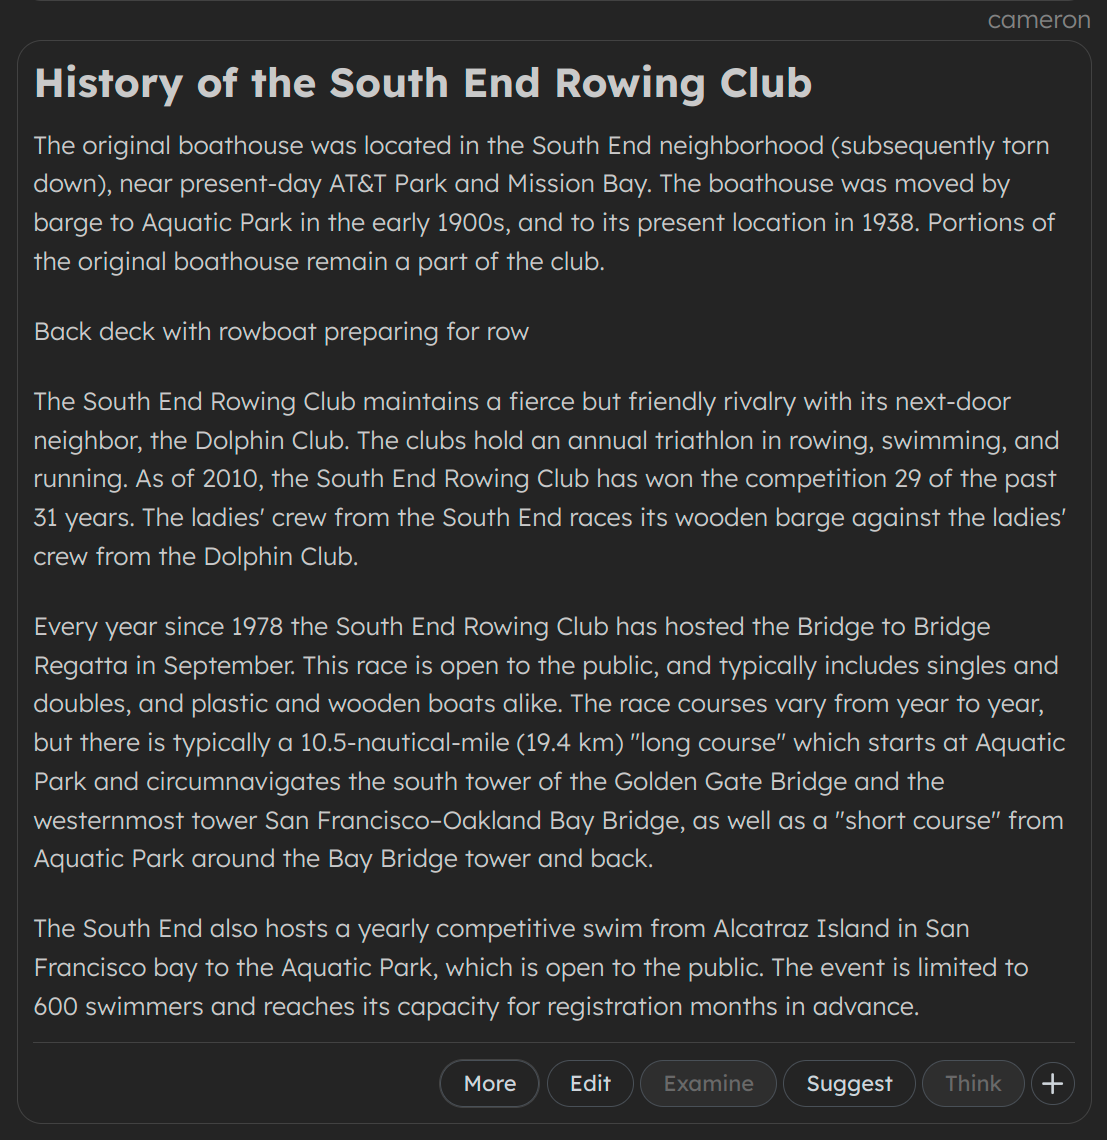 The history of the South End Rowing Club